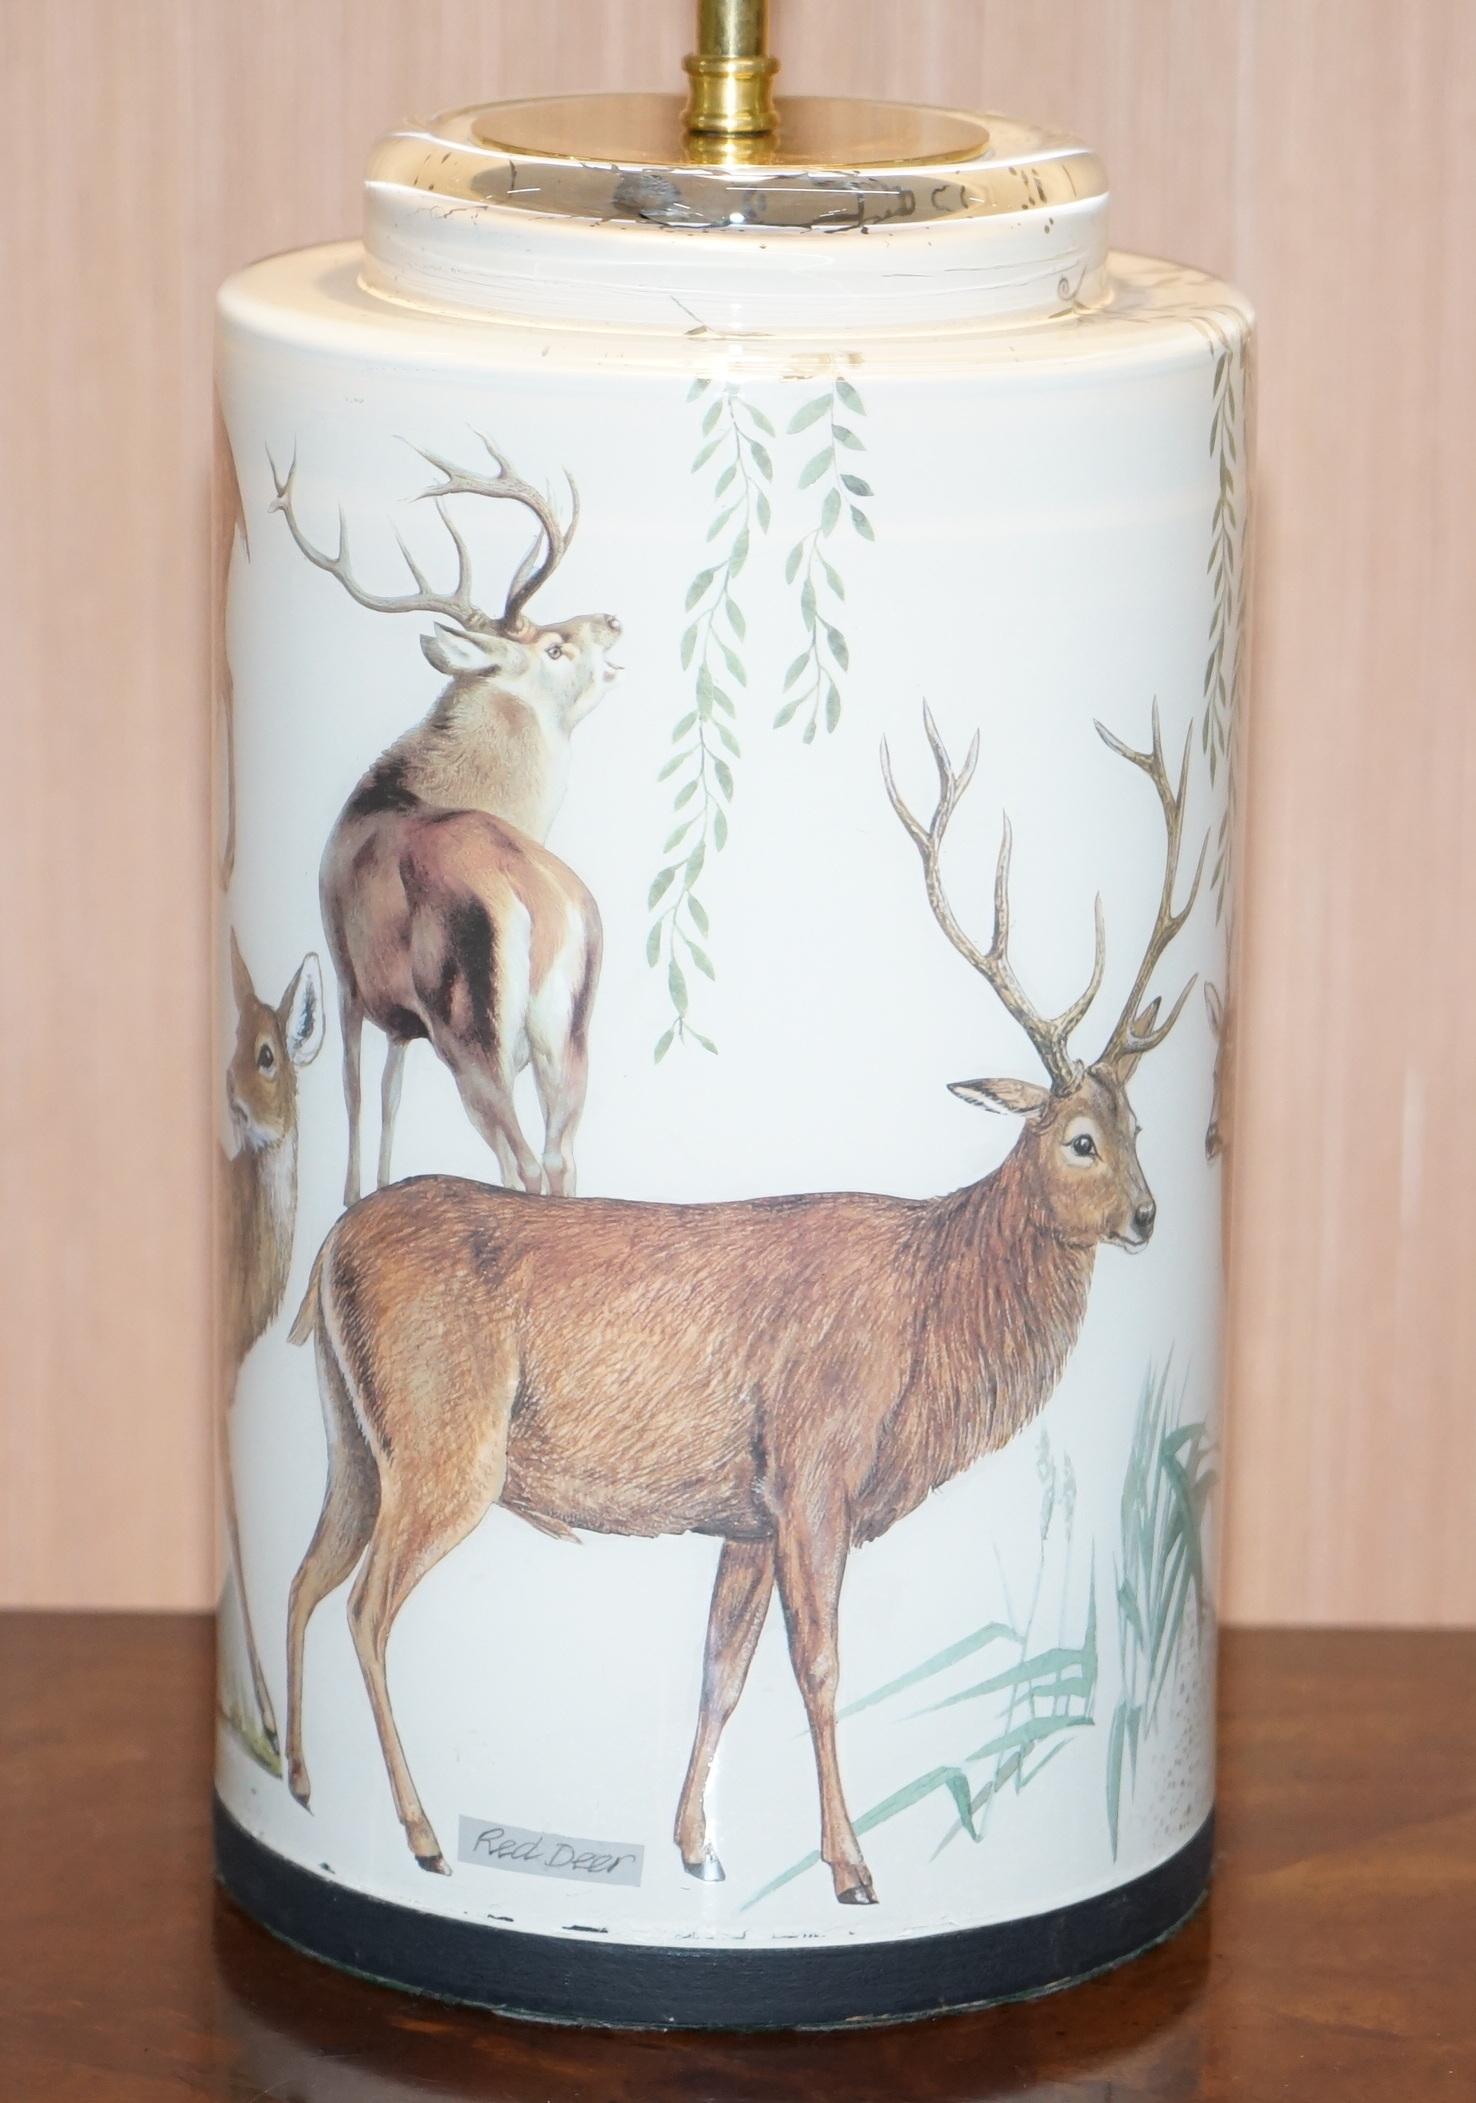 We are delighted to offer for sale this stunning hand illustrated by Diana Mayo for Vaughn lighting table lamp of deer's and stags

A very good looking and decorative piece, the style is quite neutral so it would look amazing in any setting

All